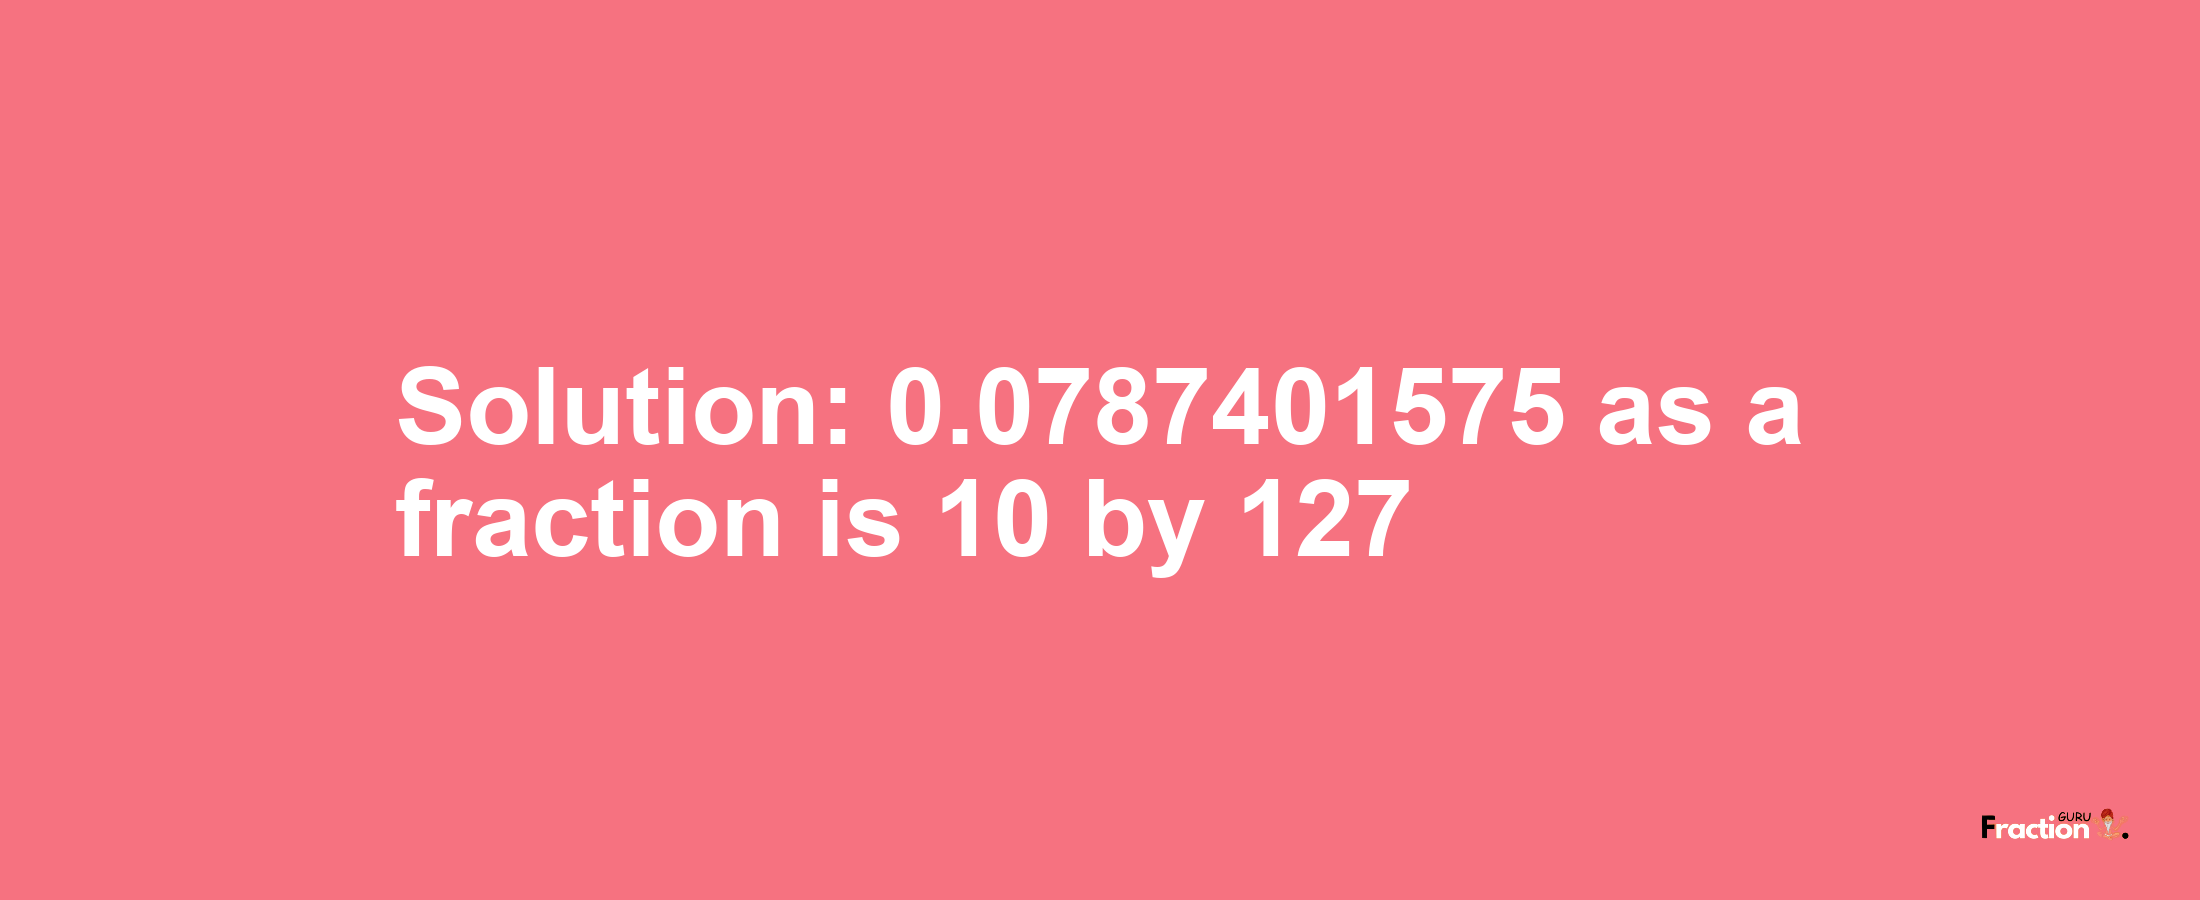 Solution:0.0787401575 as a fraction is 10/127